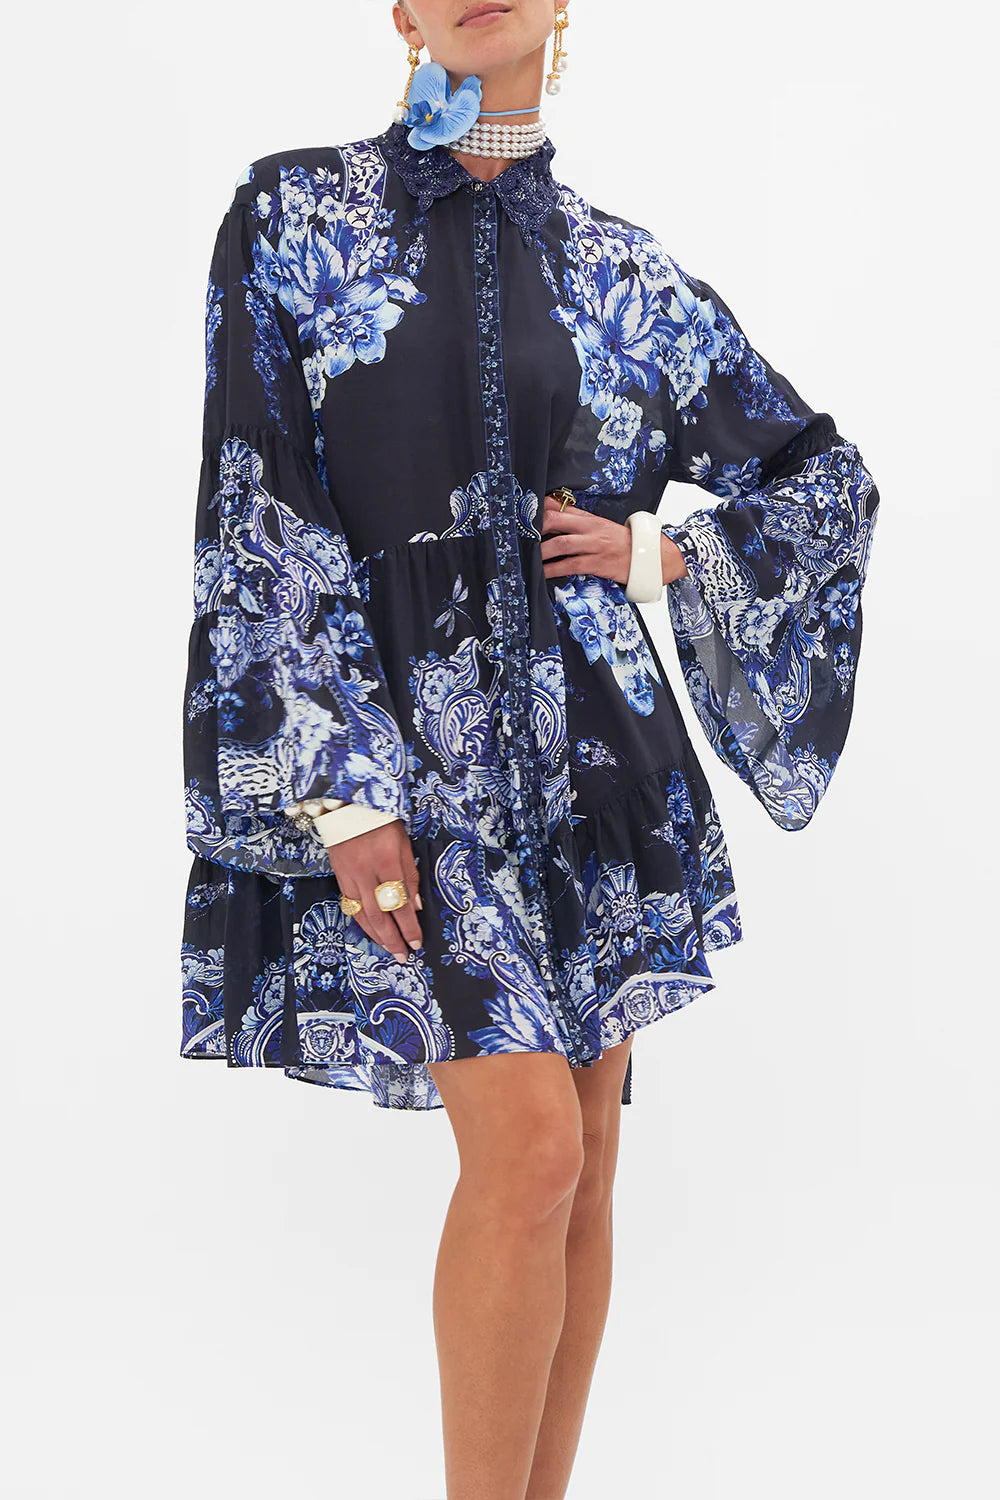 CAMILLA TIERED DRESS WITH CUTWORK LACE COLLAR - DELFT DYNASTY